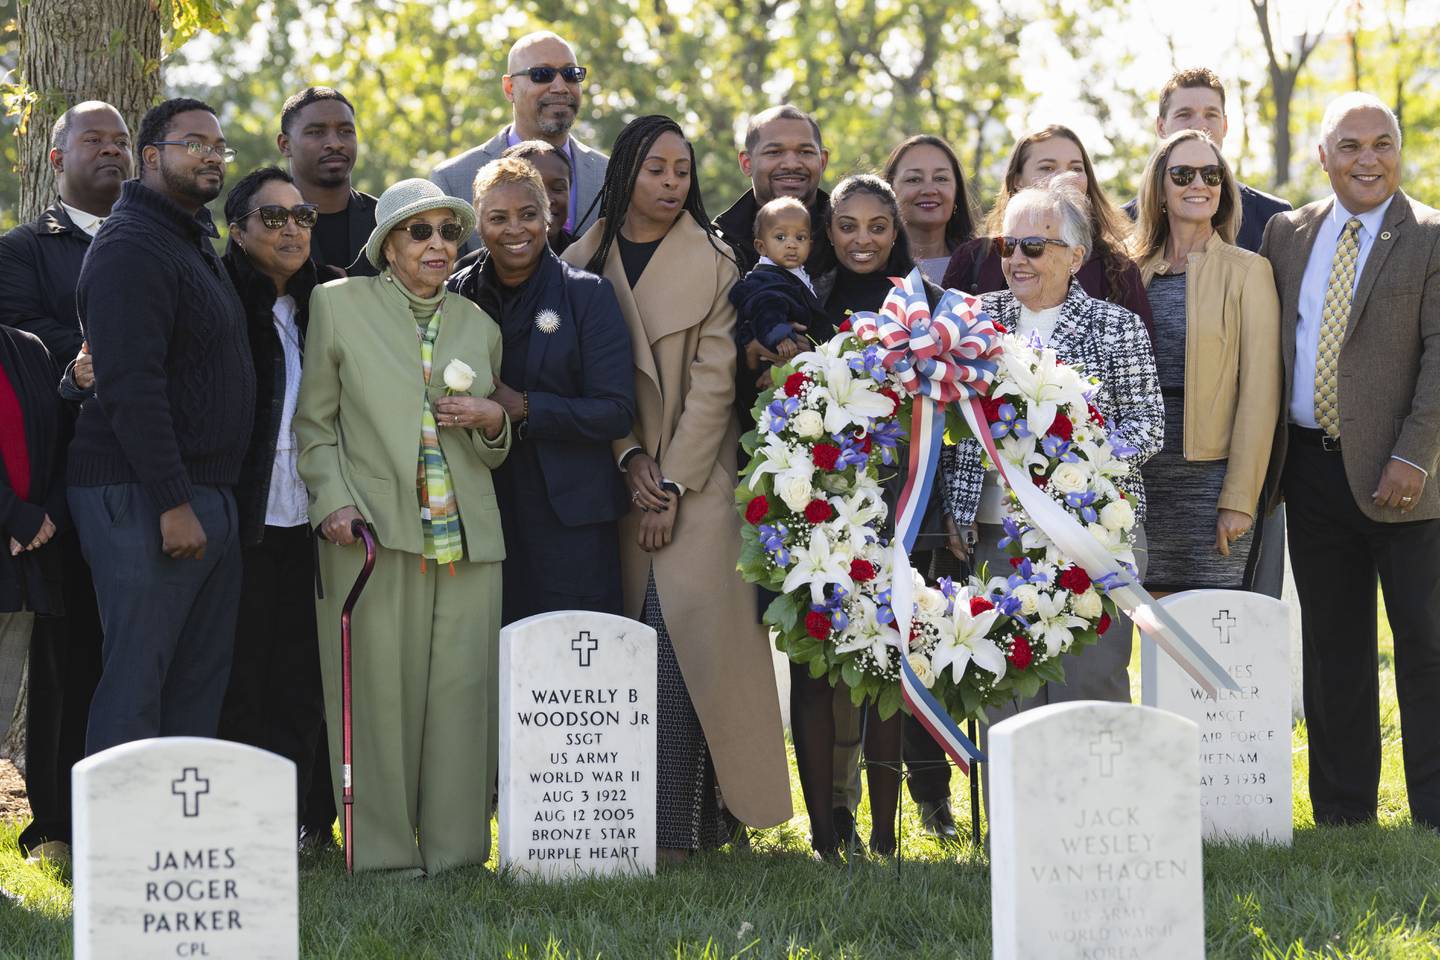 Joann Woodson, in green, is joined by family at the headstone of her husband, Cpl. Waverly B. Woodson Jr., following a ceremony at Arlington National Cemetery on Tuesday, Oct. 11, 2023 in Arlington, Va.